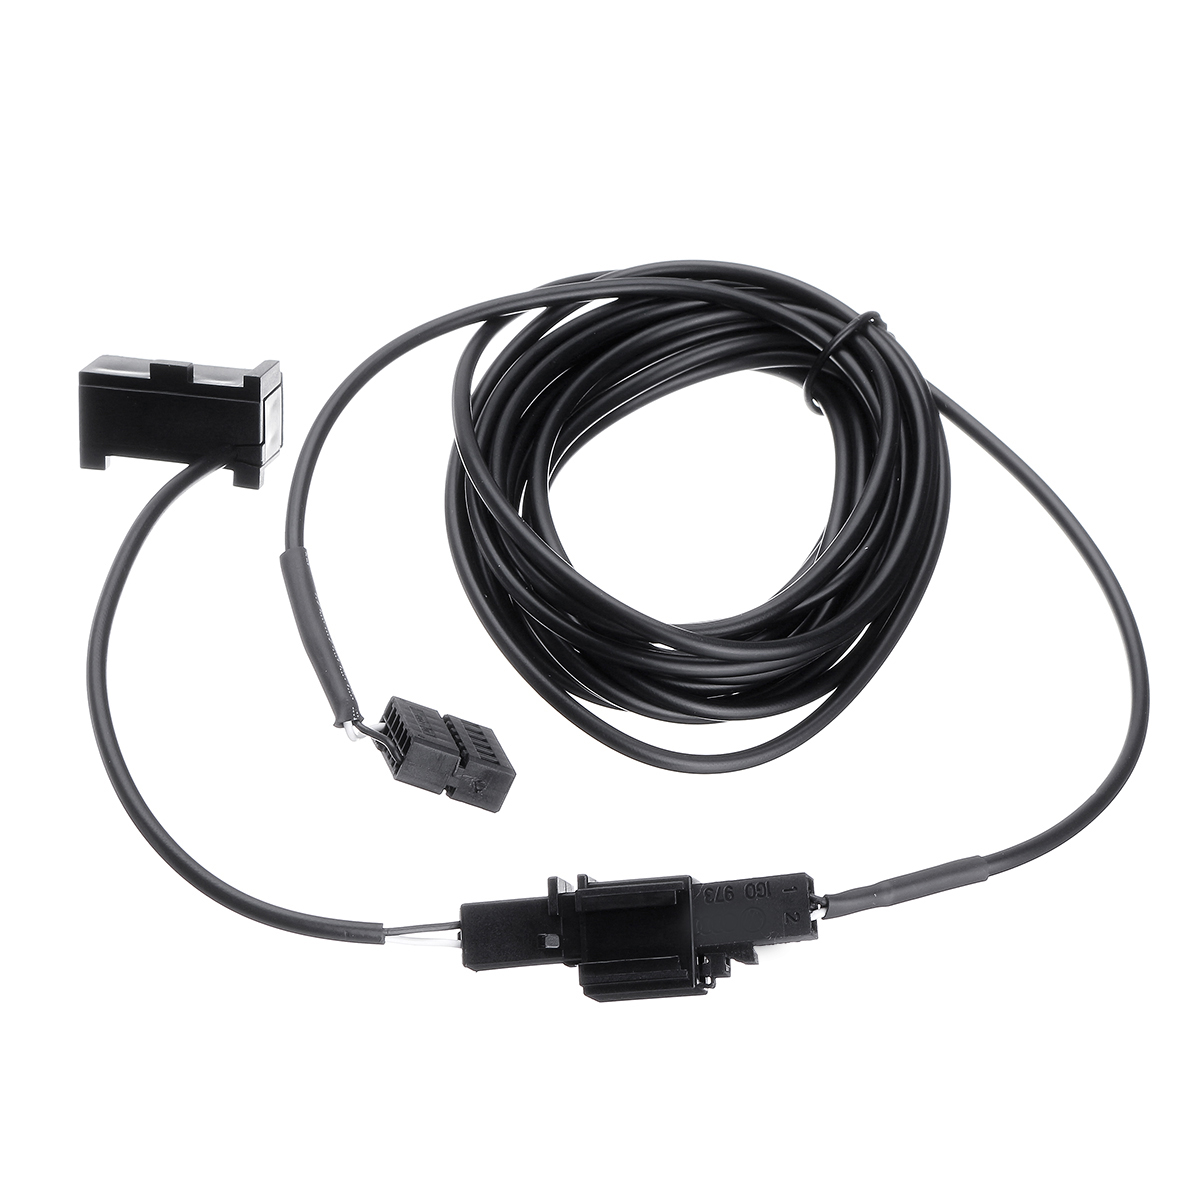 4m-Car-CD-USB-Microphone-bluetooth-Aux-Cable-Auto-Wireless-Audio-Input-Speaker-Adapter-for-BMW-1-3-S-1480556-9